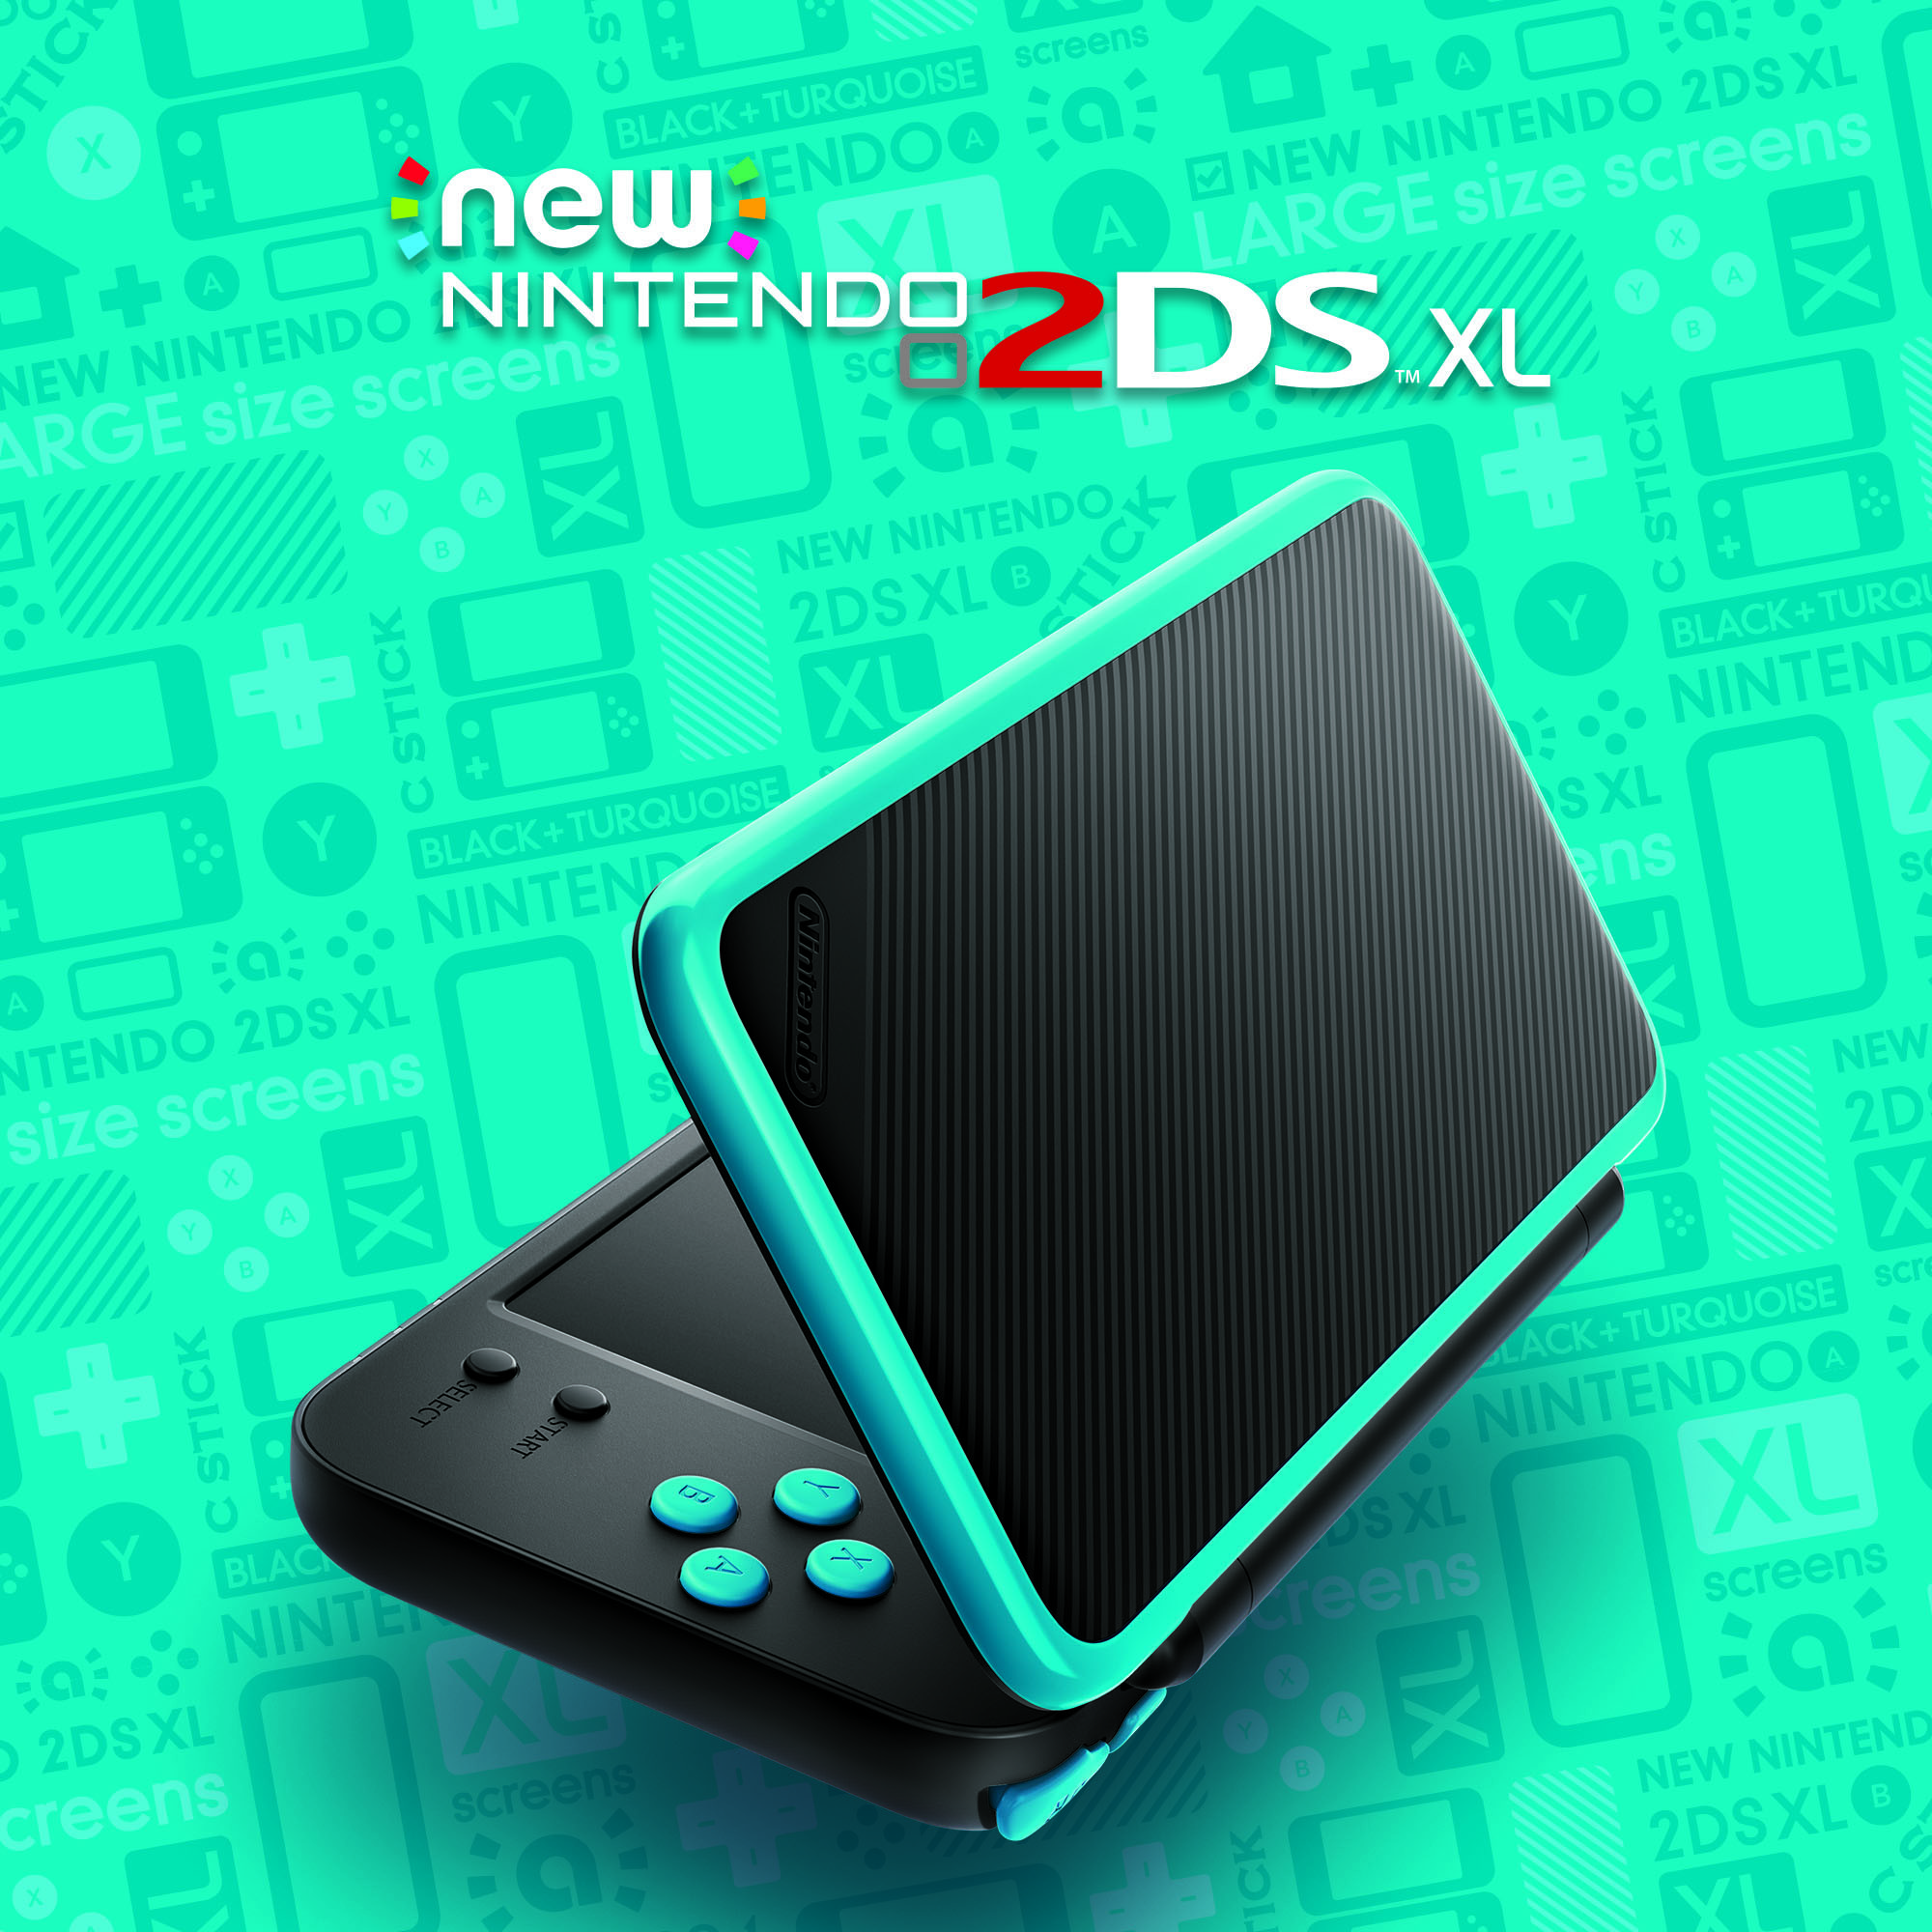 when was the new 3ds released